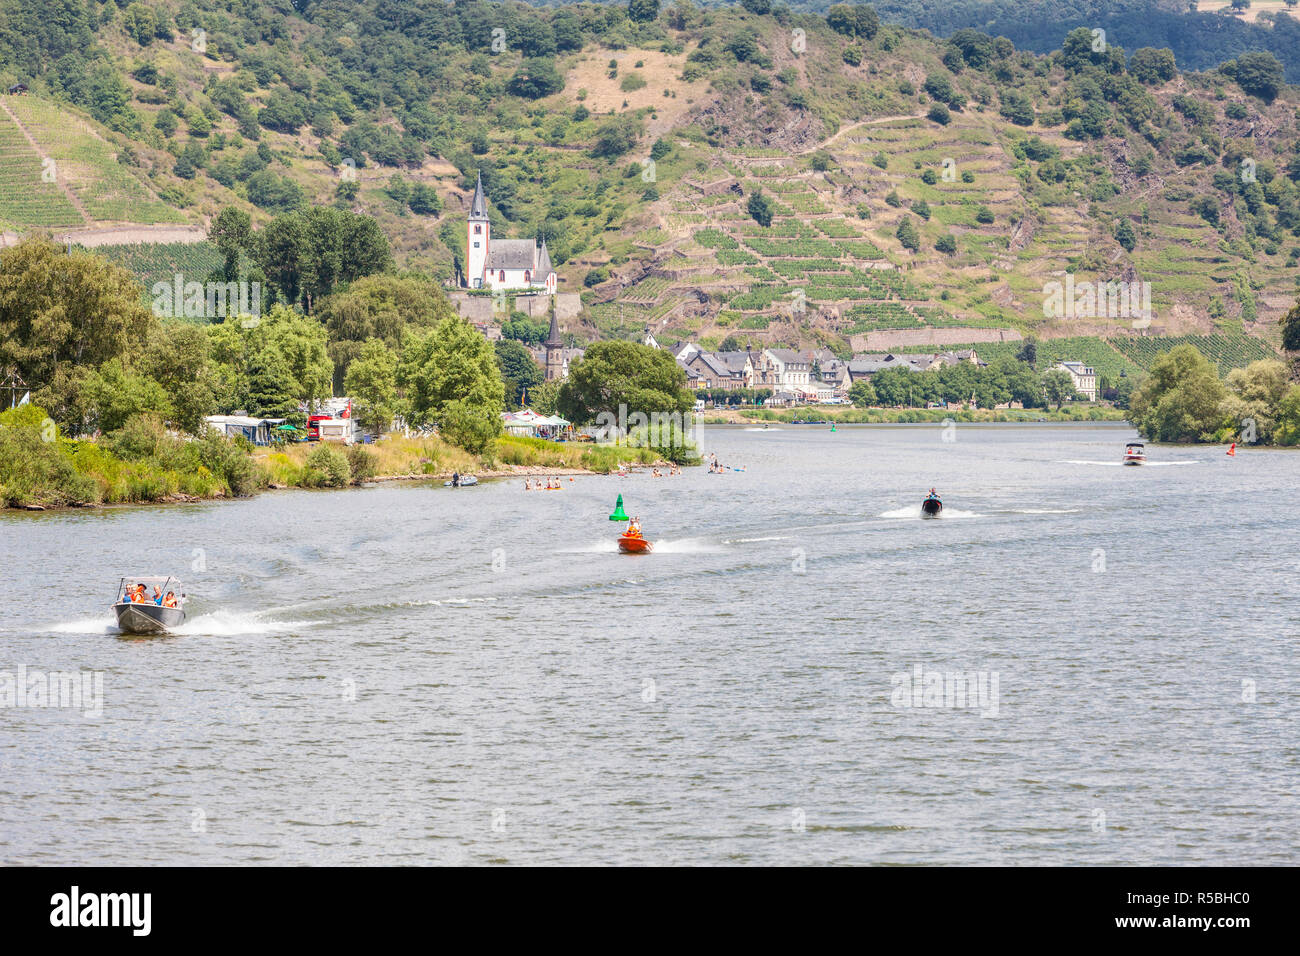 Hatzenport, Germany, on the Moselle.  Summer Boating and Swimming. Stock Photo